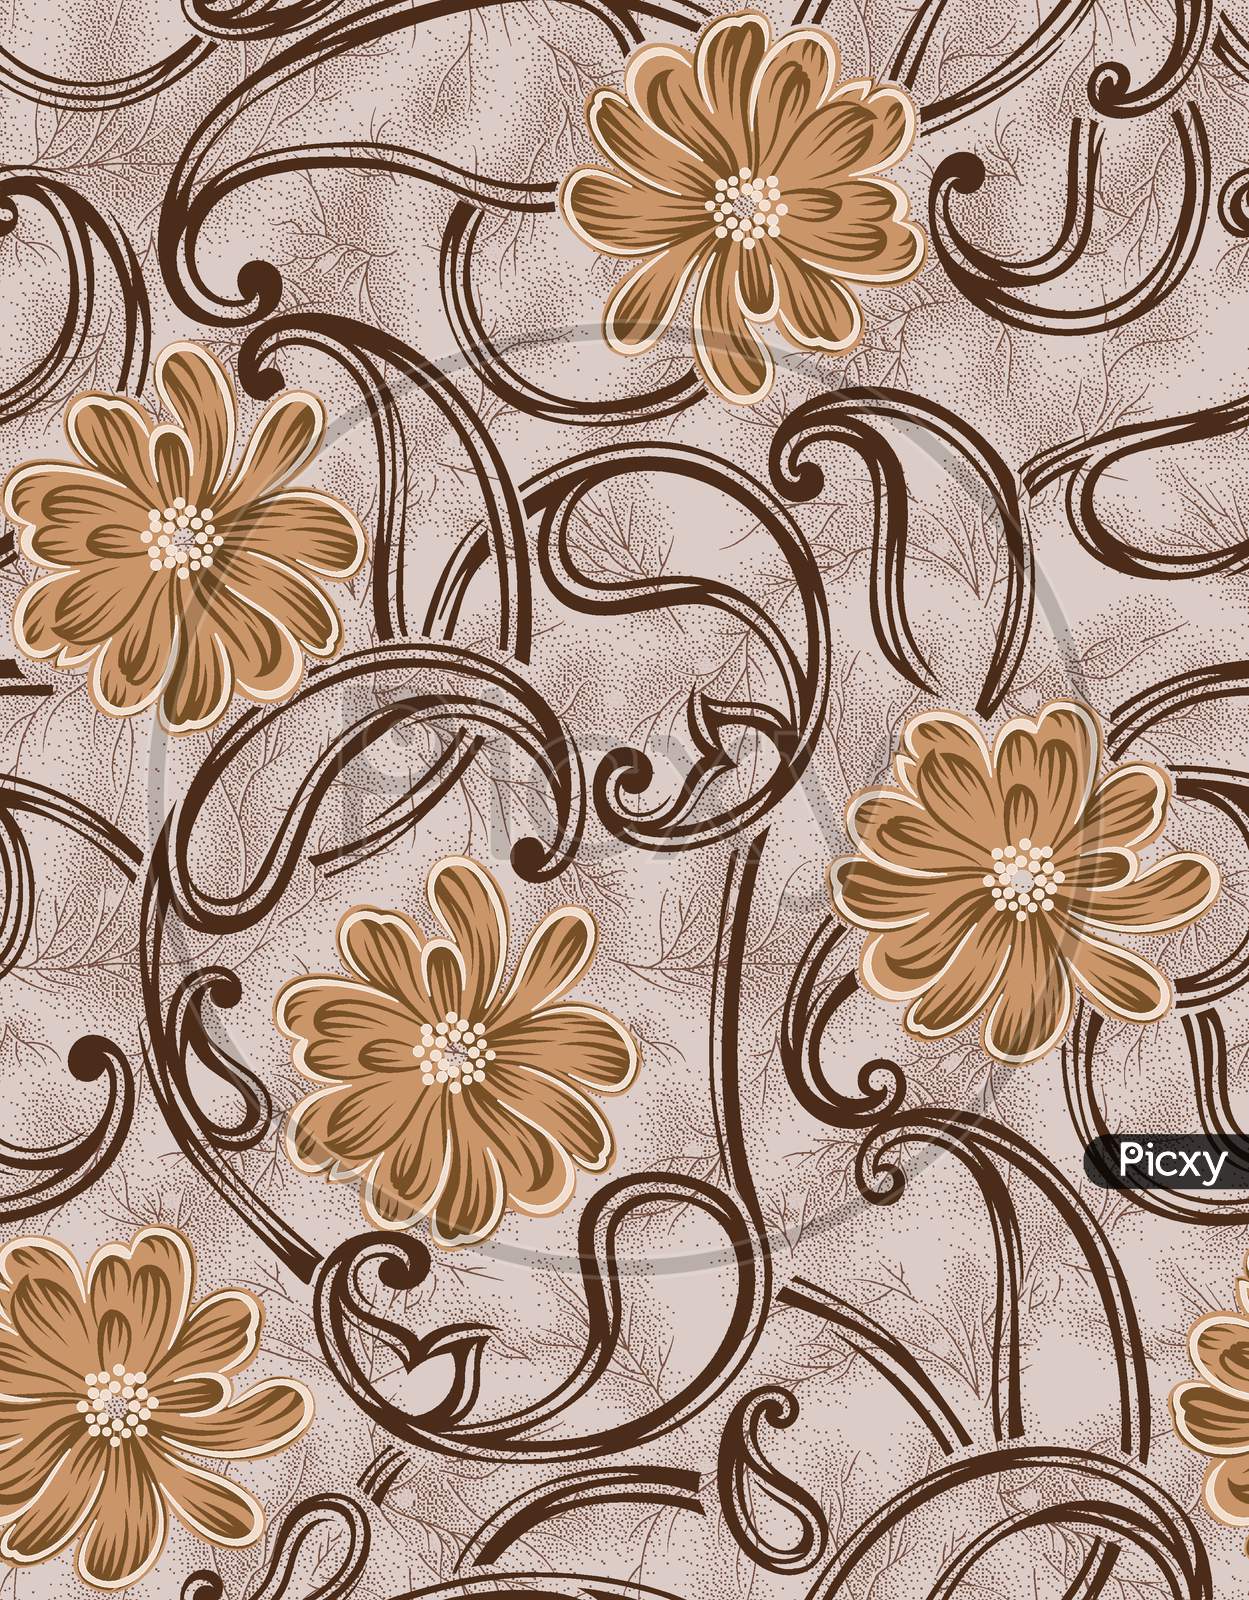 Seamless Vintage Flower Paisley With Texture Background